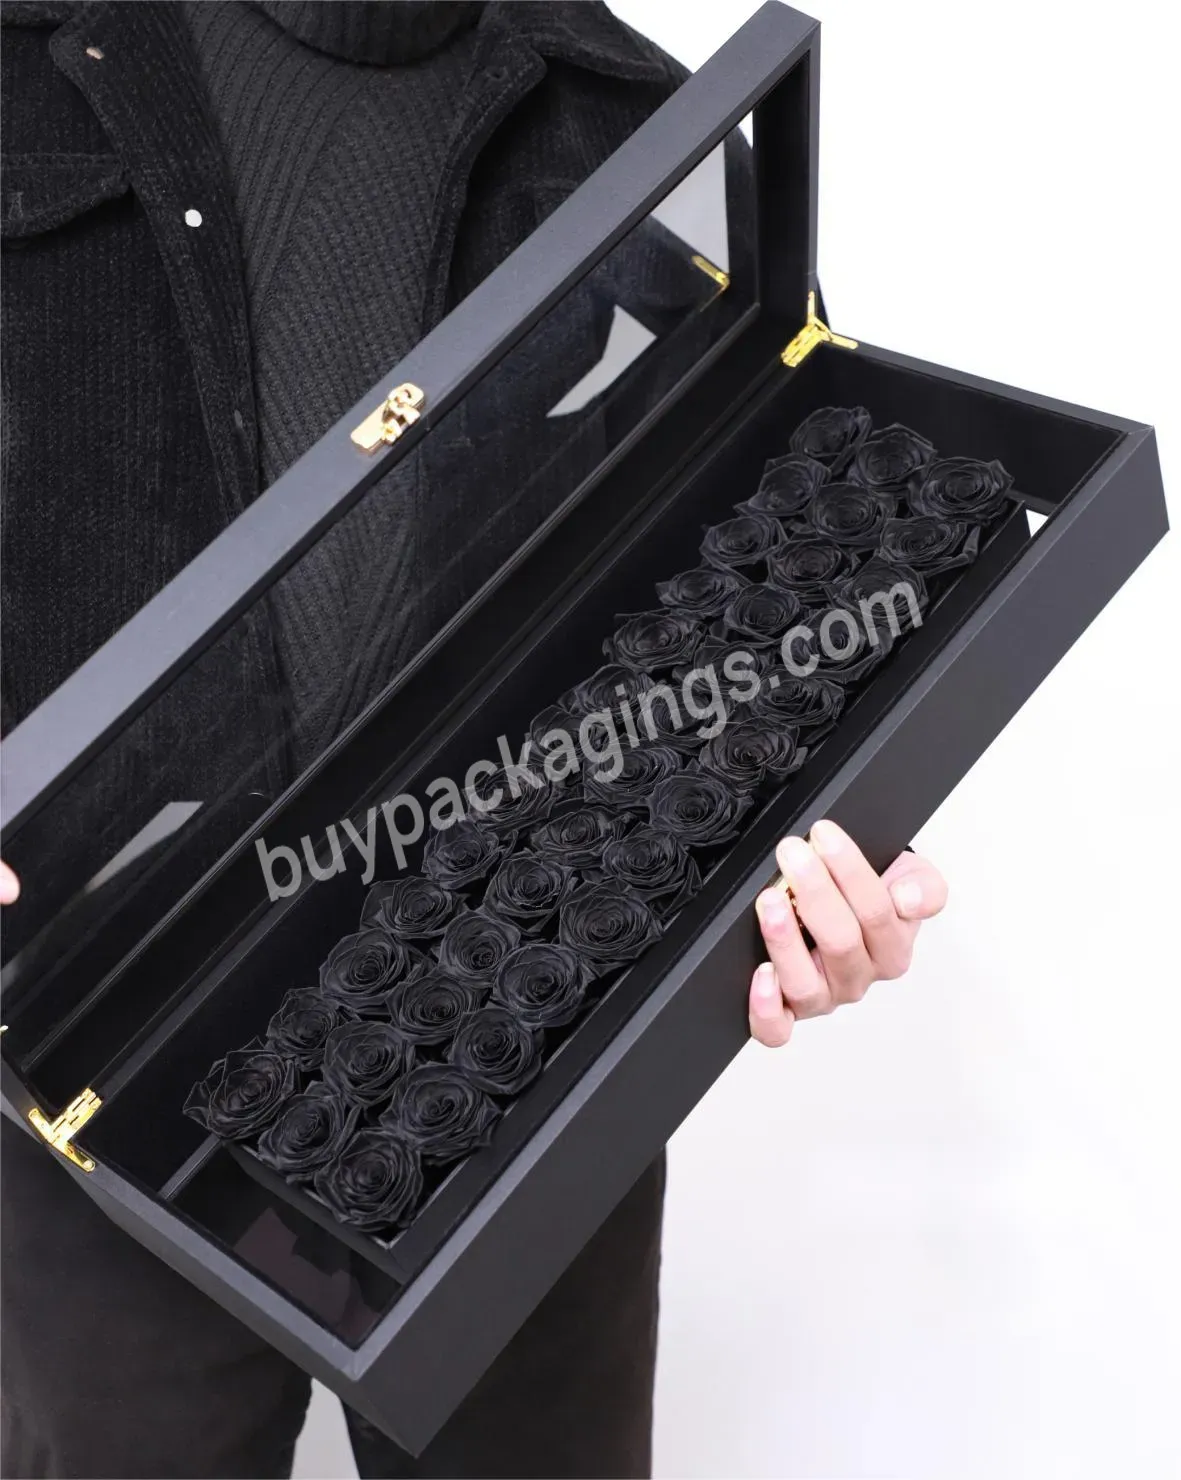 Hot Selling Leather Rectangular Inner Flower Box Luxury Floral Box For Valentine's Day Wedding - Buy Hot Selling Leather Rectangular Inner Flower Box,Luxury Floral Box,Floral Box For Valentine's Day Wedding.